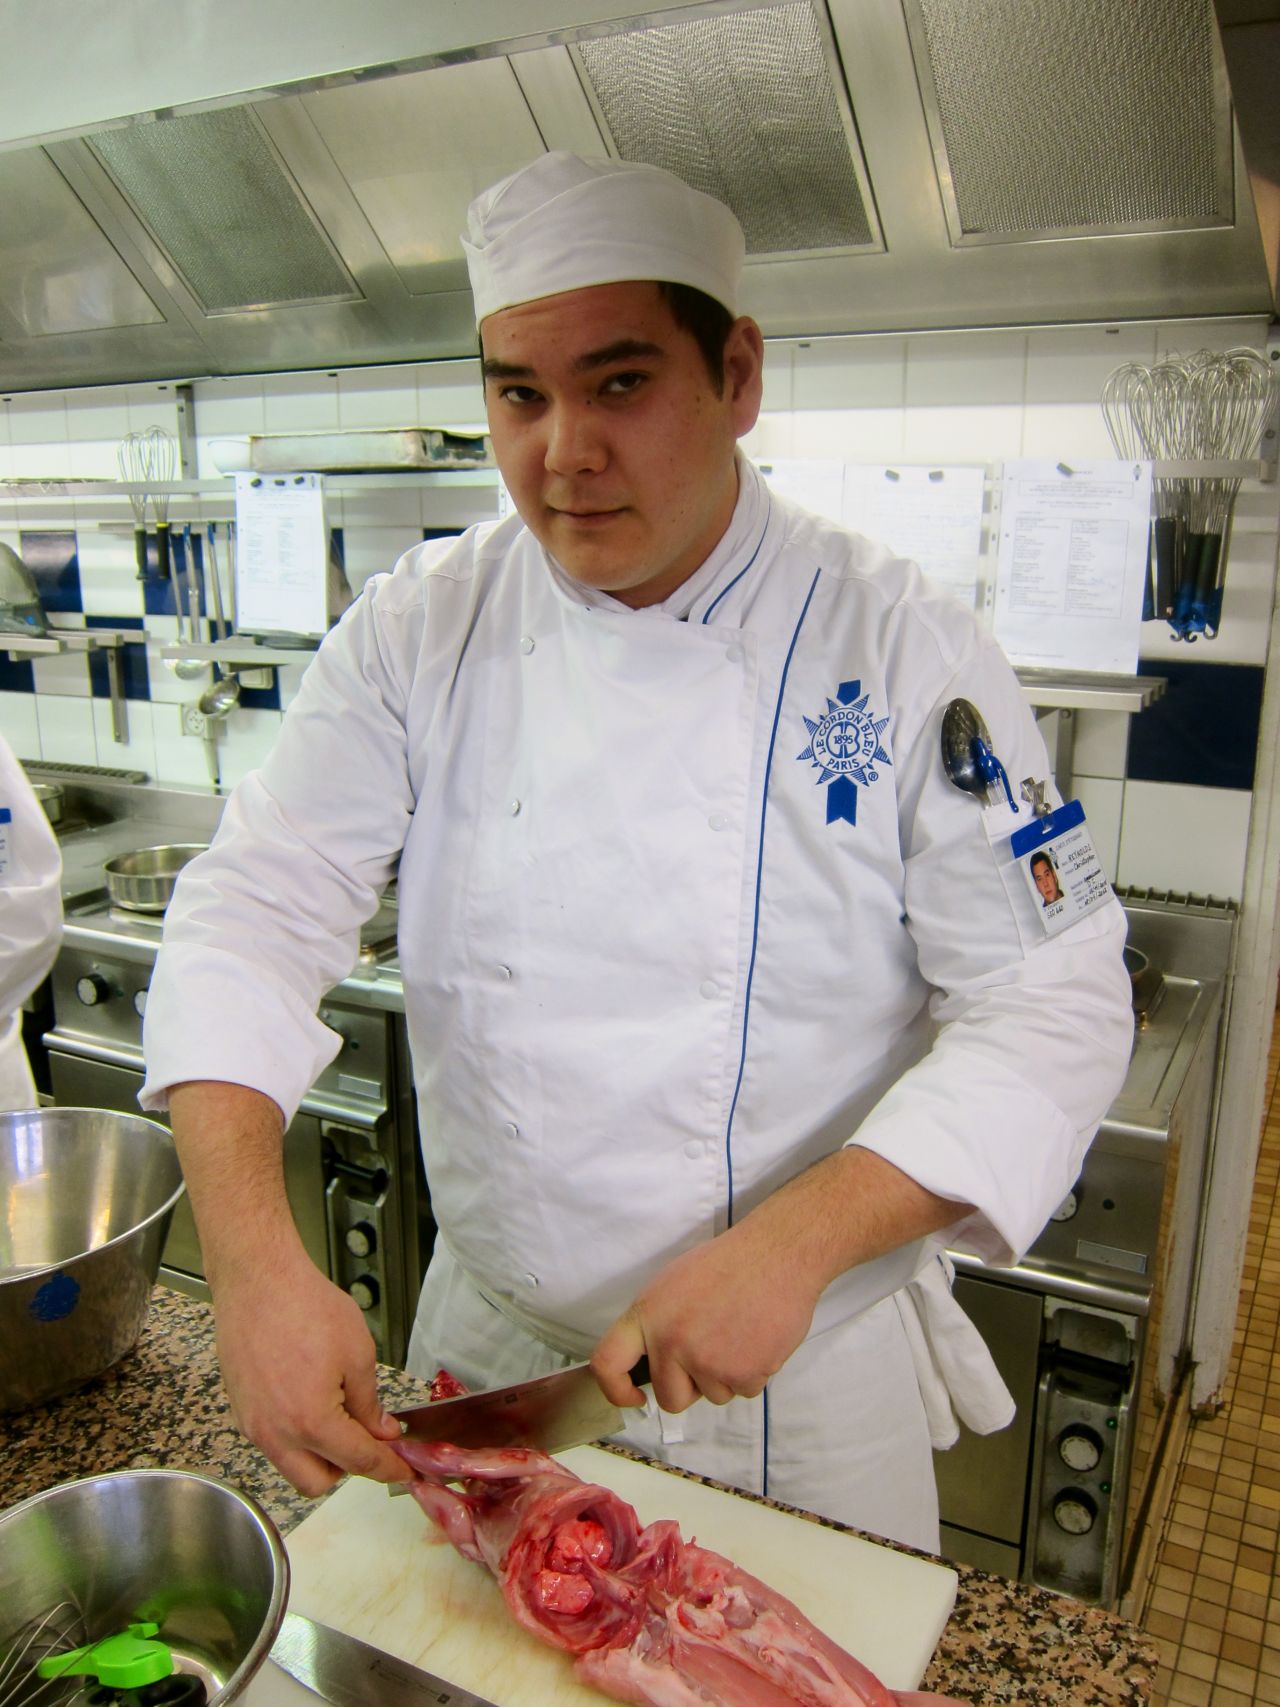 Chris Reynolds, 26, is a line cook at Morimoto in New York City.